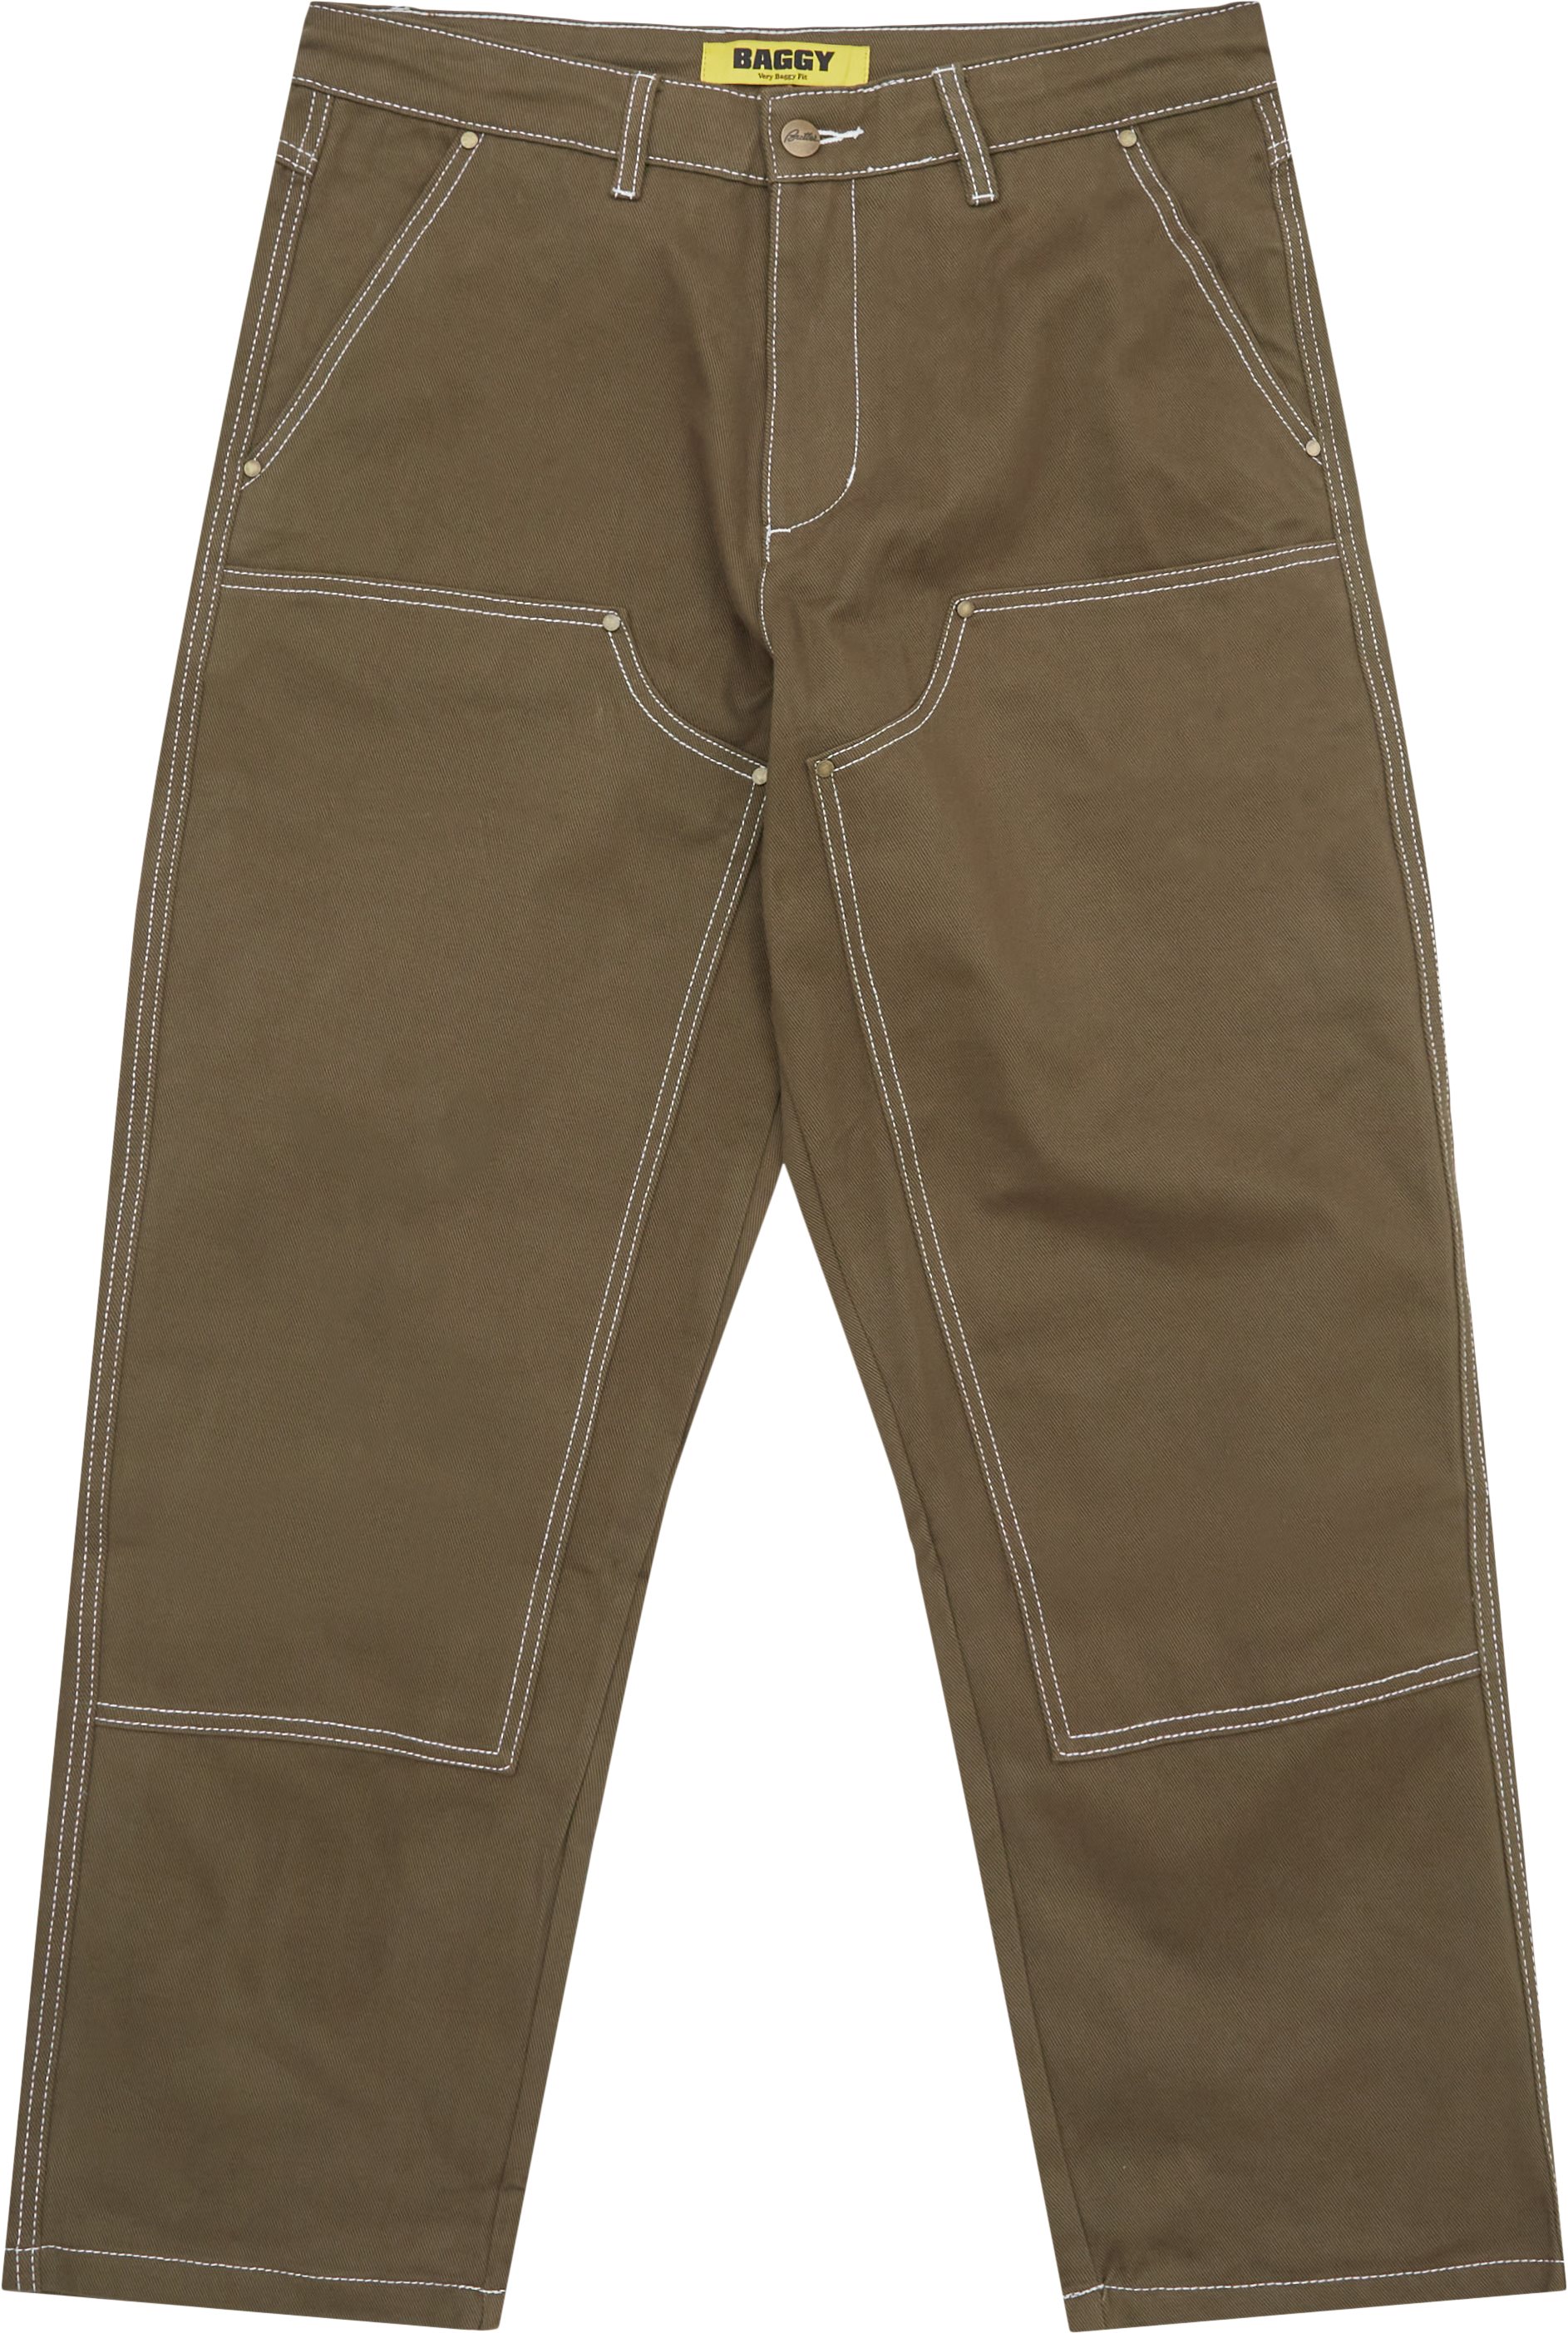 Butter Goods Trousers DOUBLE KNEE PANTS Army